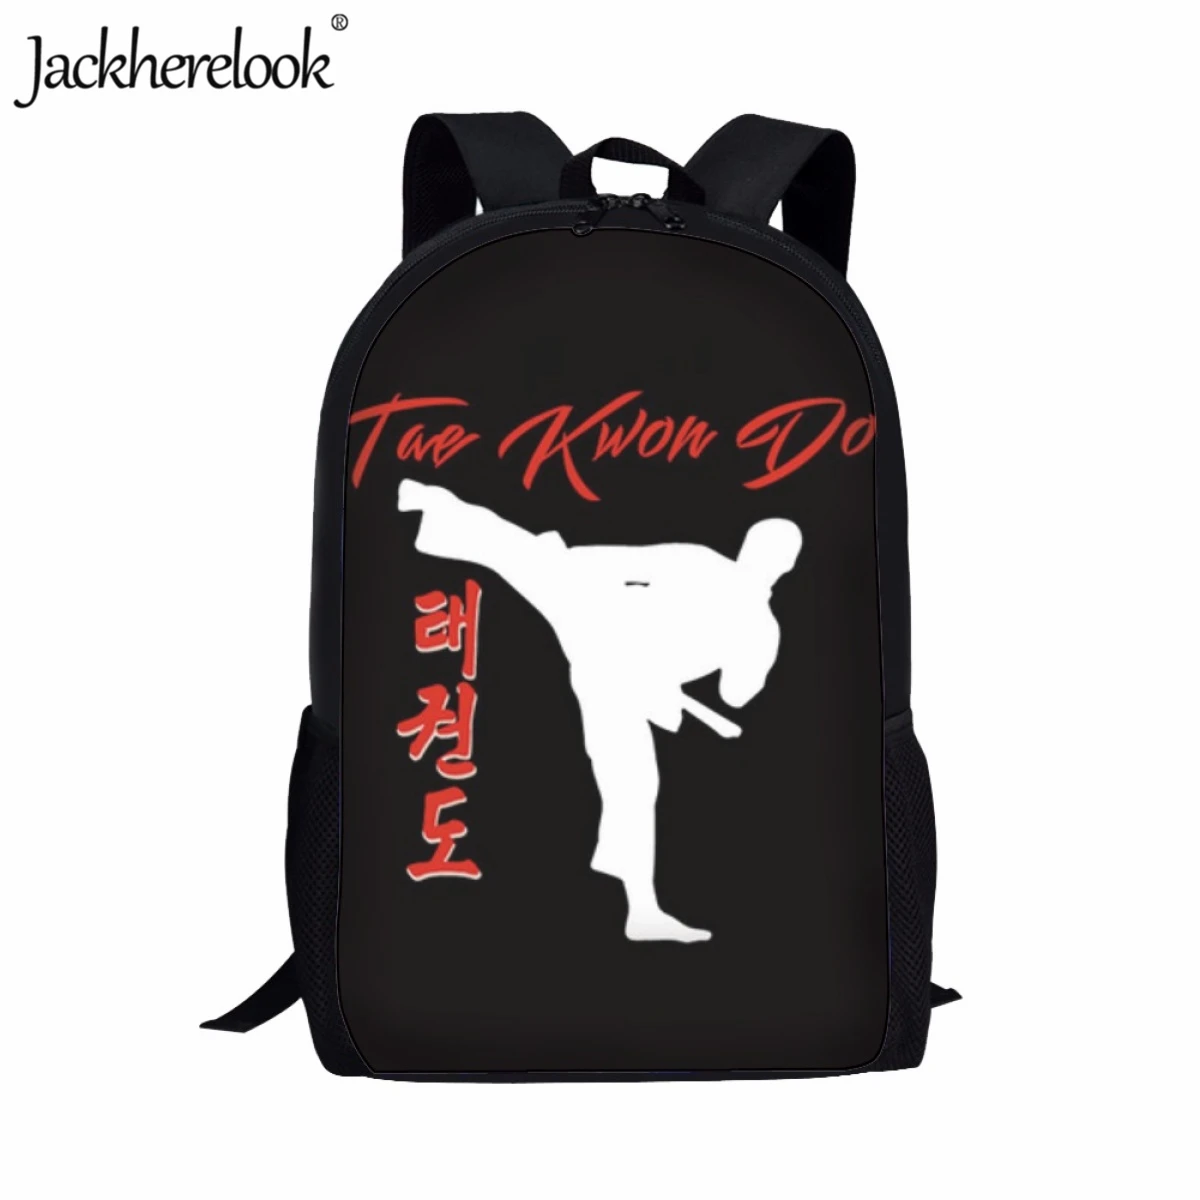 

Jackherelook Fashion Leisure Youth Schoolbag Martial Arts Judo Aikido Trend New Cartoon Backpack for Students Travel Book Bags